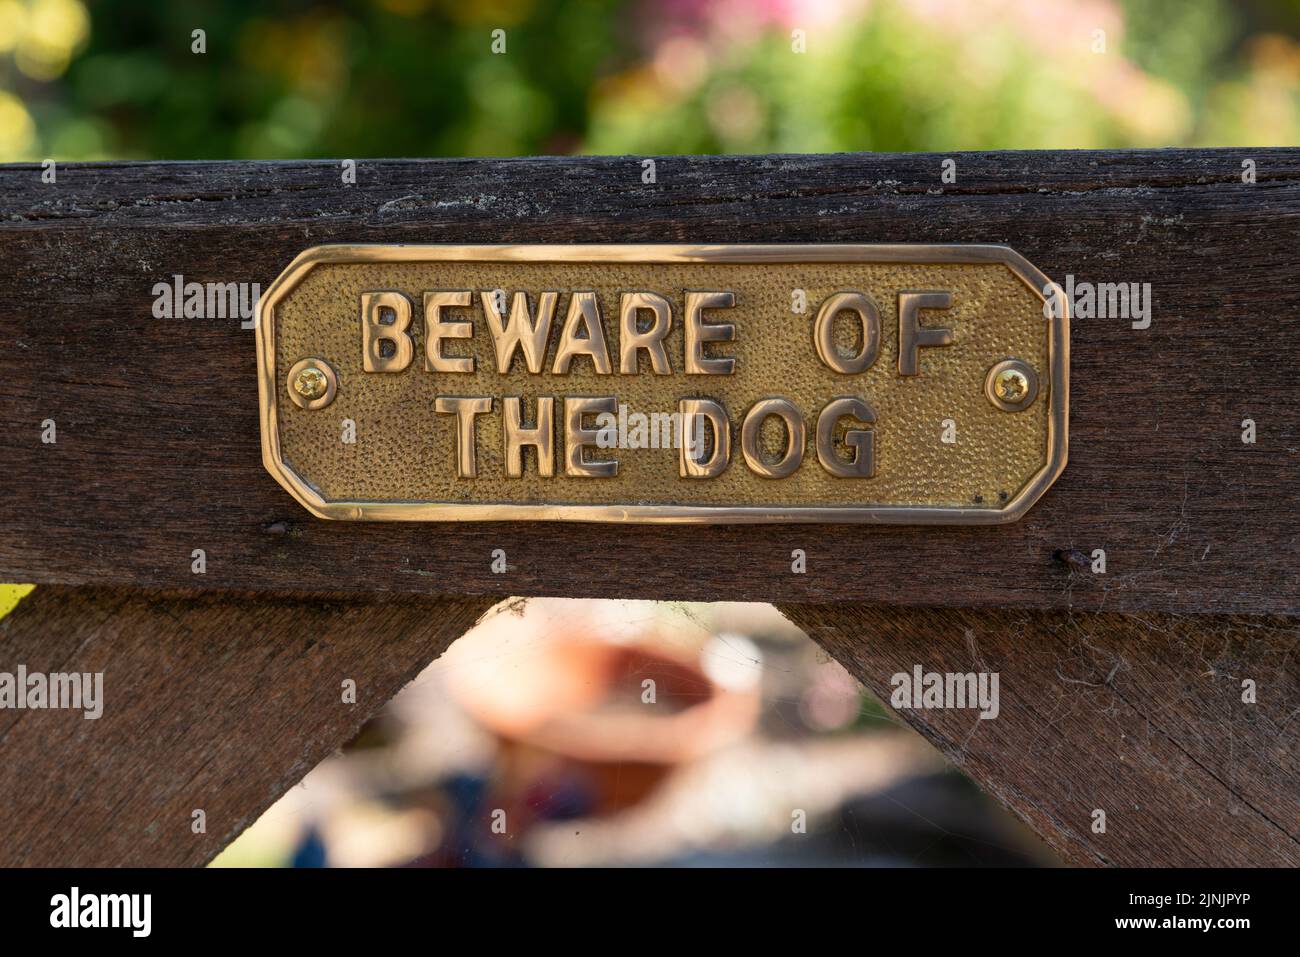 Hampshire, England, UK. 2022. Beware of the dog sign on a wooden gate. Stock Photo